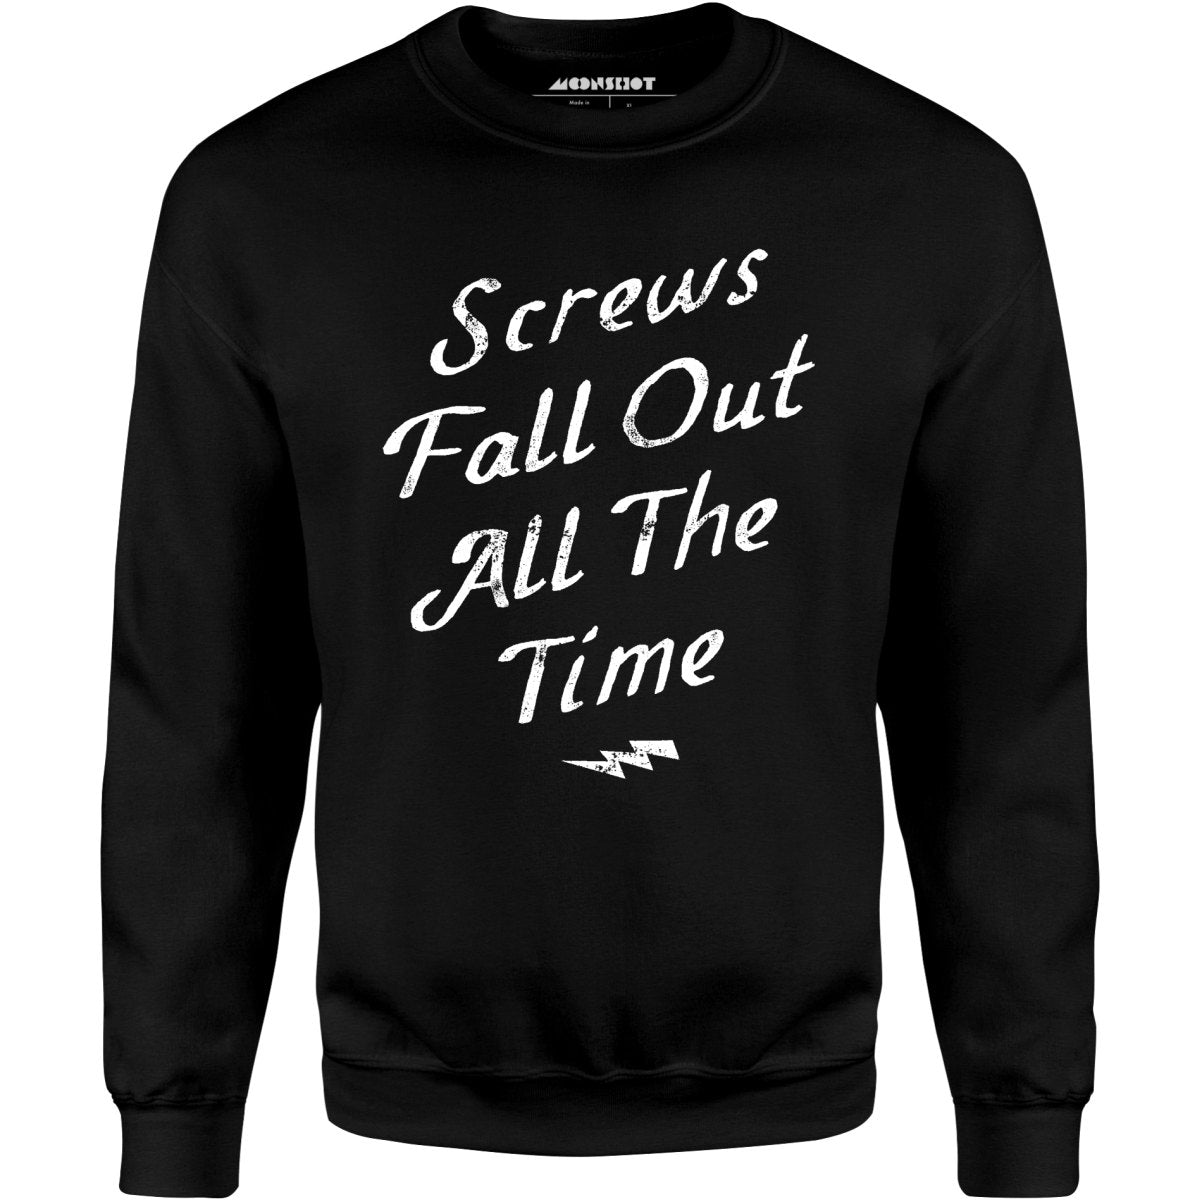 Screws Fall Out All The Time - Unisex Sweatshirt